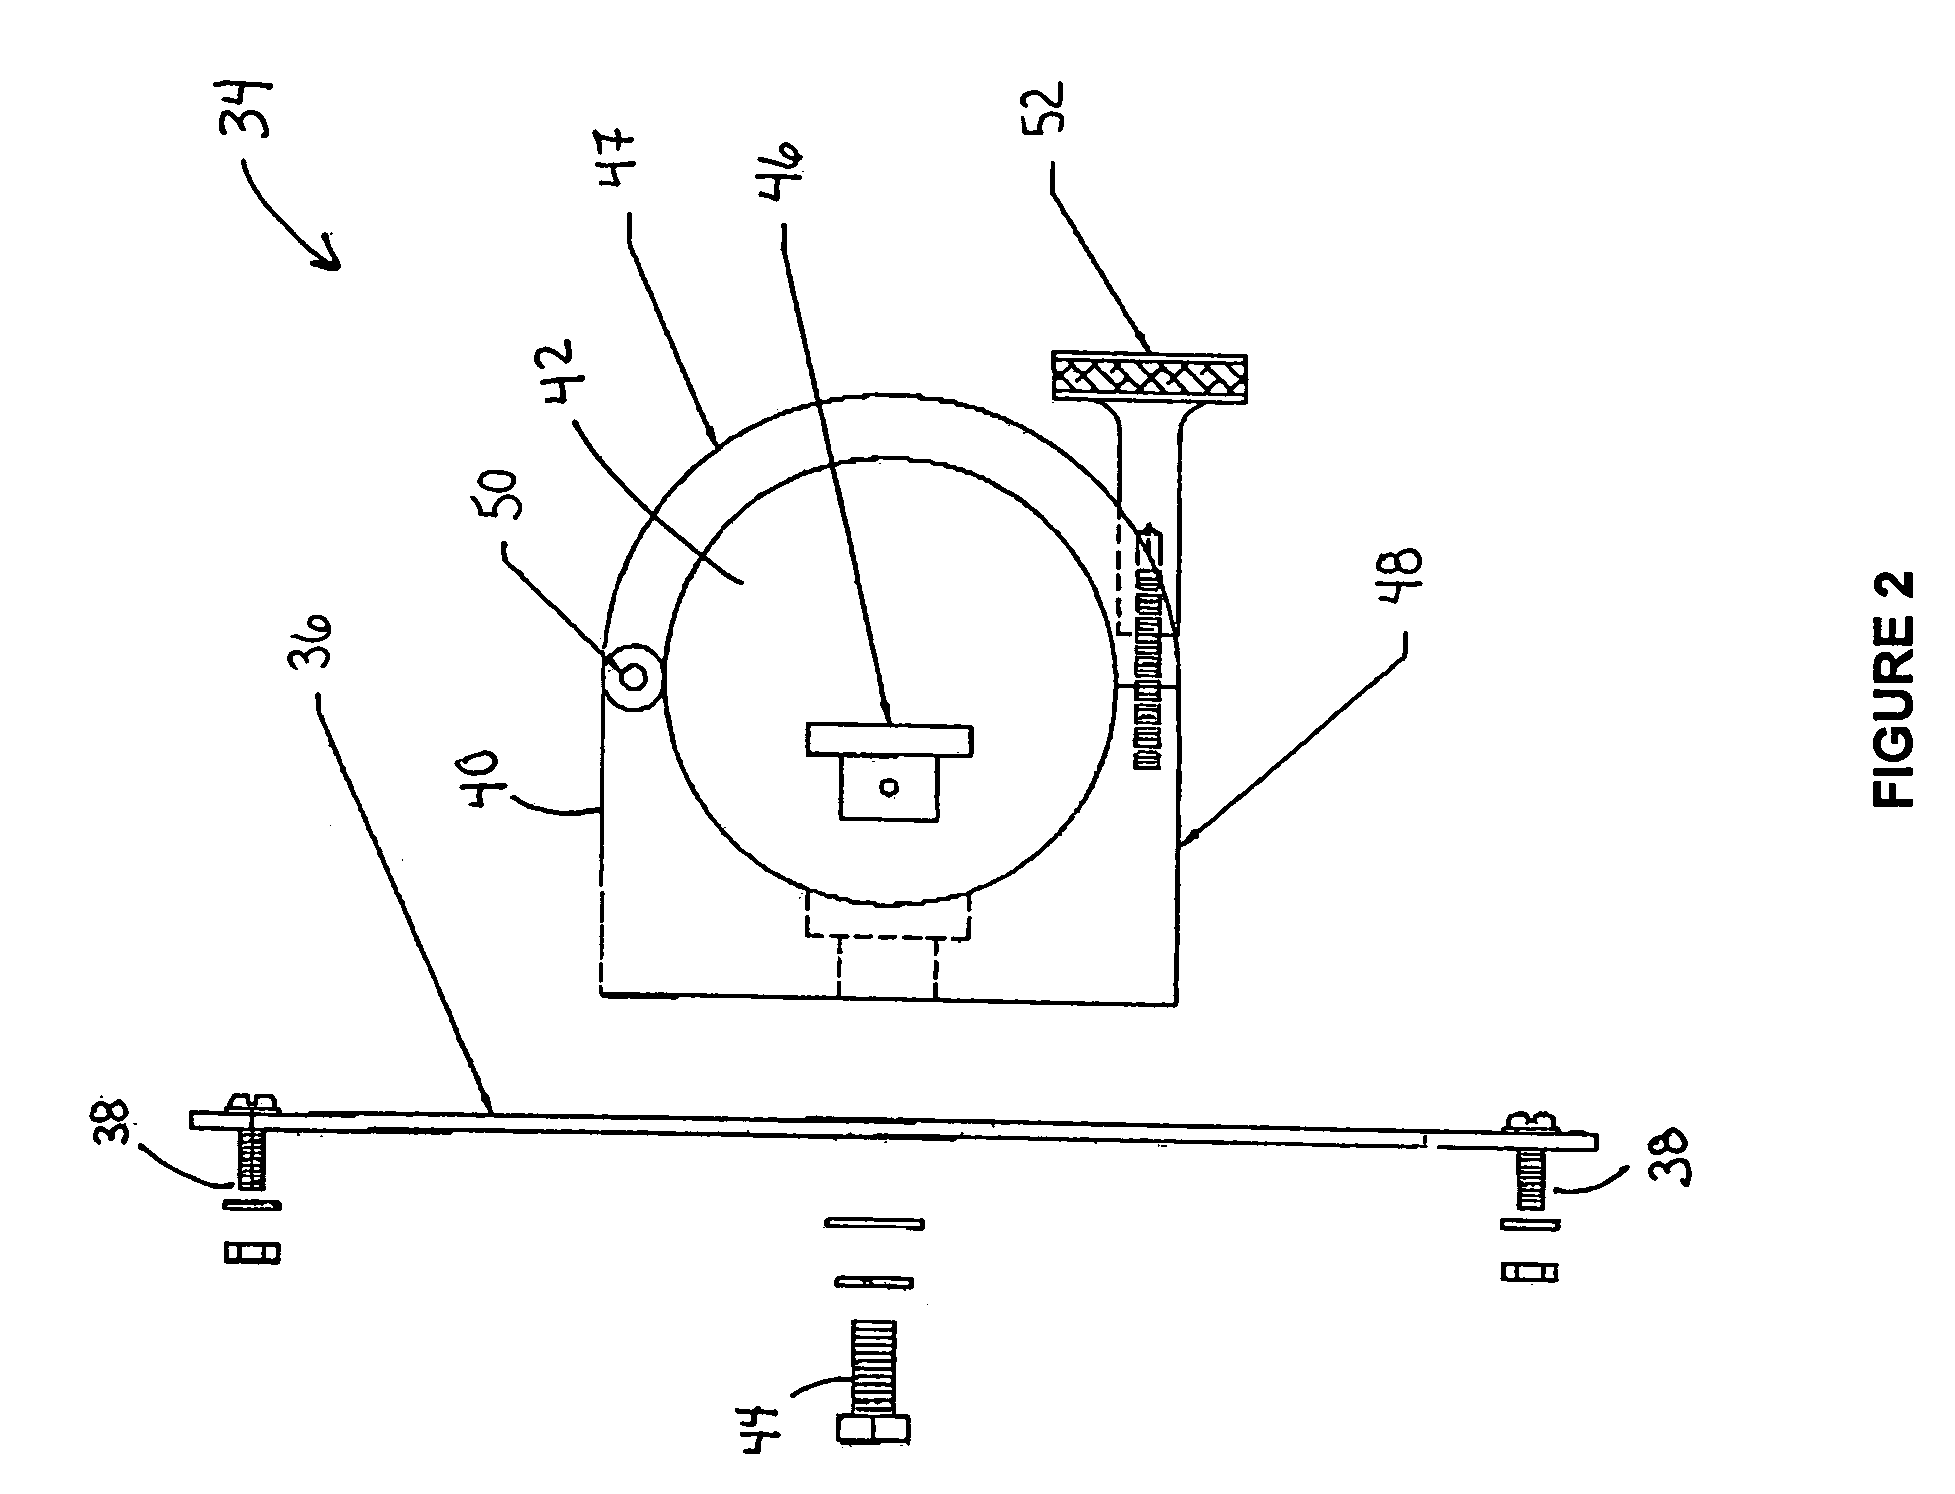 Apparatus and method of portable automated biomonitoring of water quality